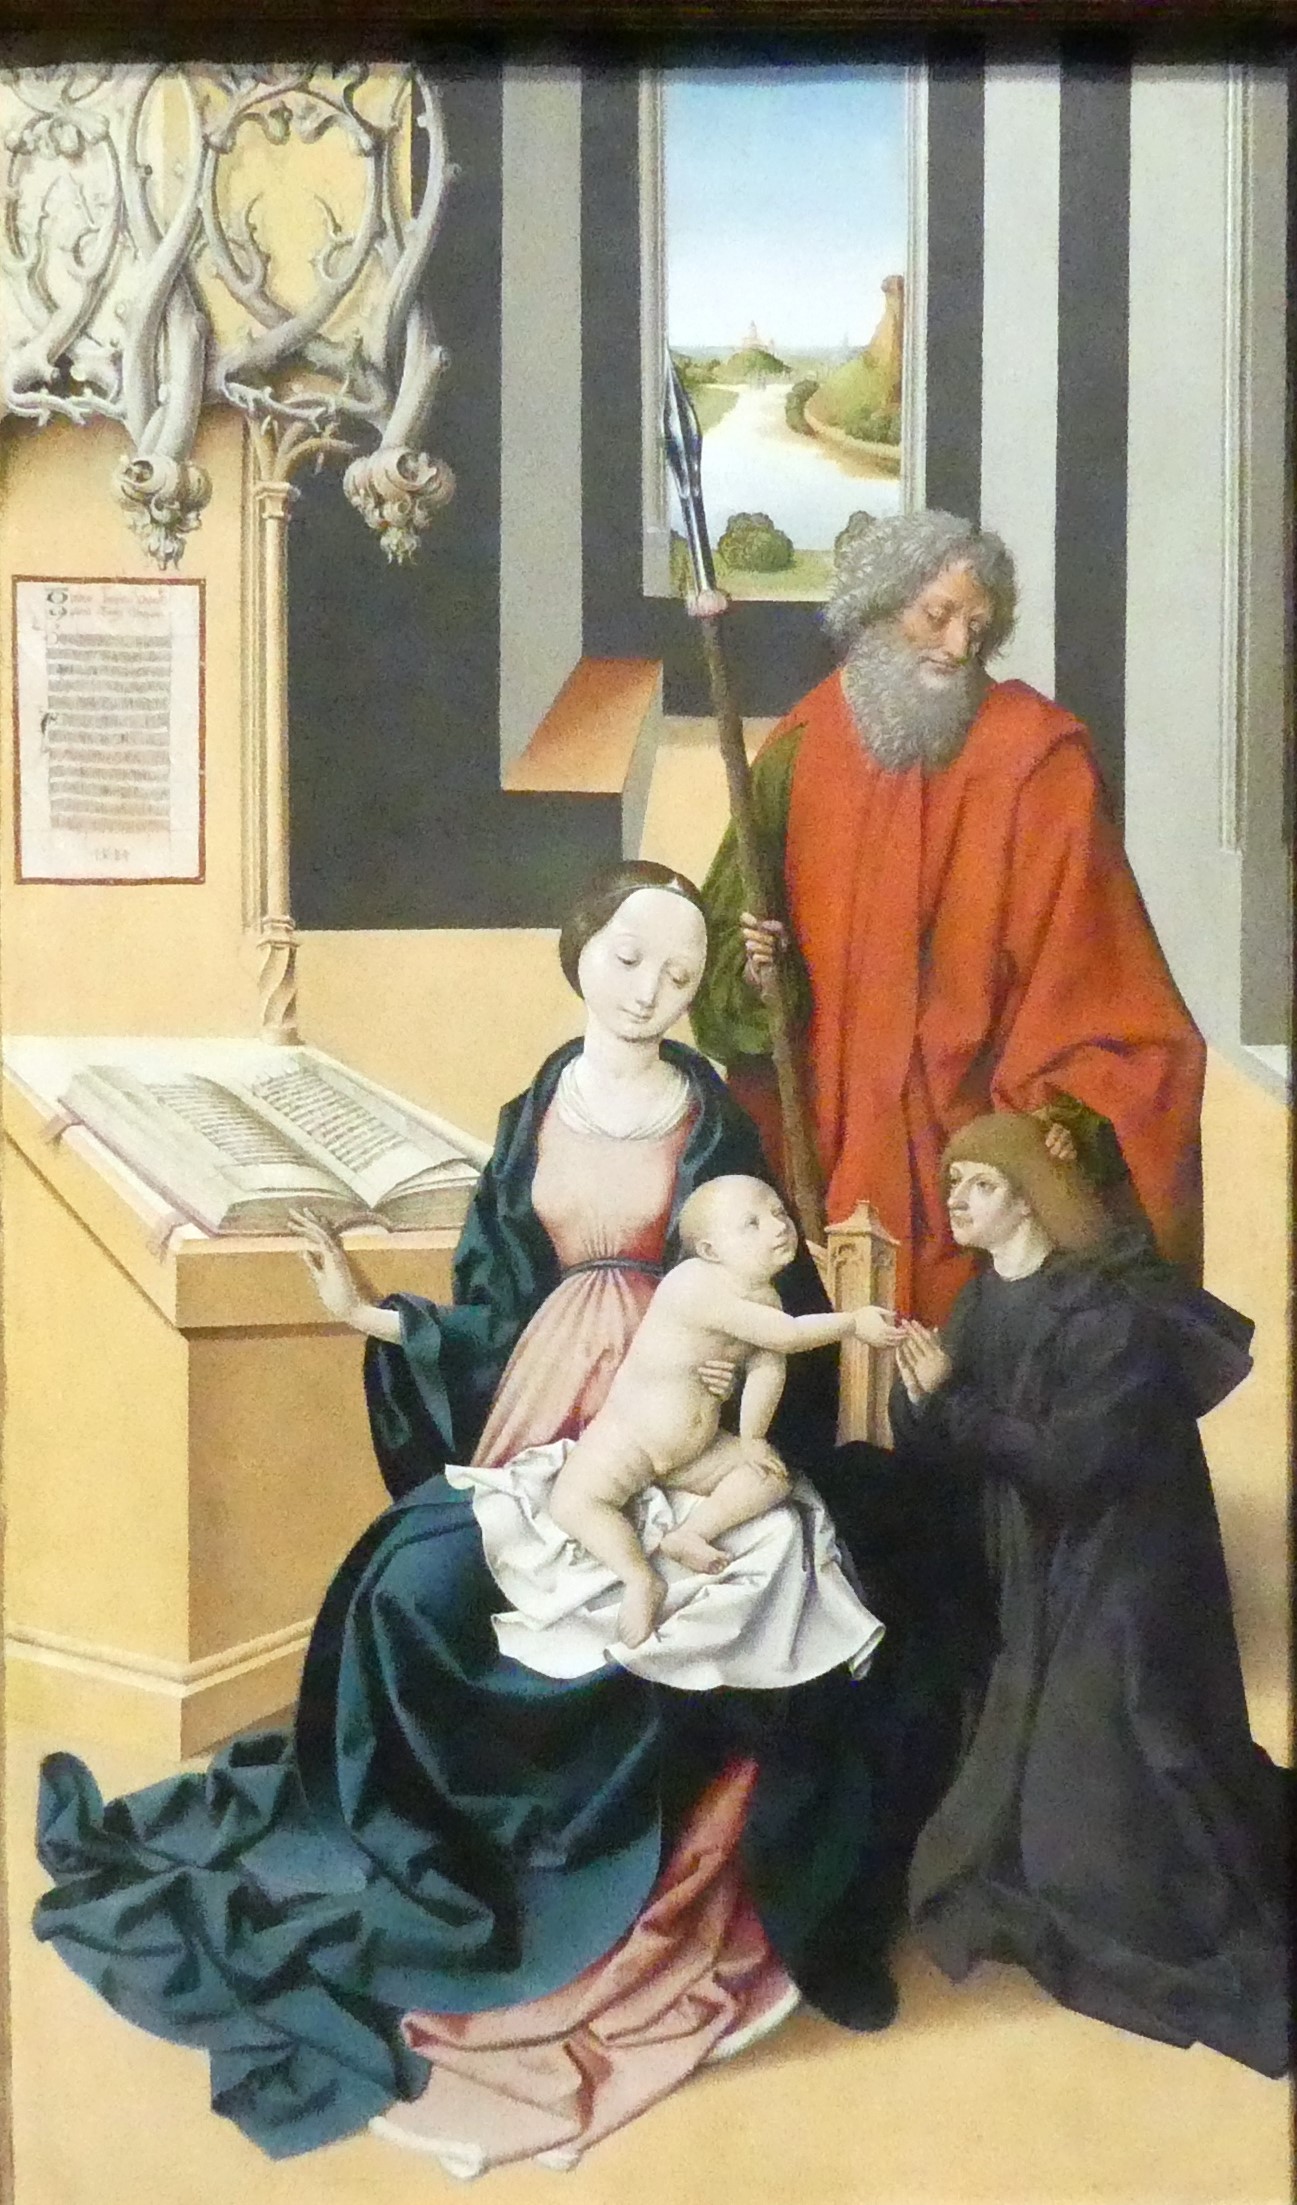 1483 Grossgmain Master Virgin and Child and a Donor Presented by Saint Thomas, Staedelmuseum, Francfort